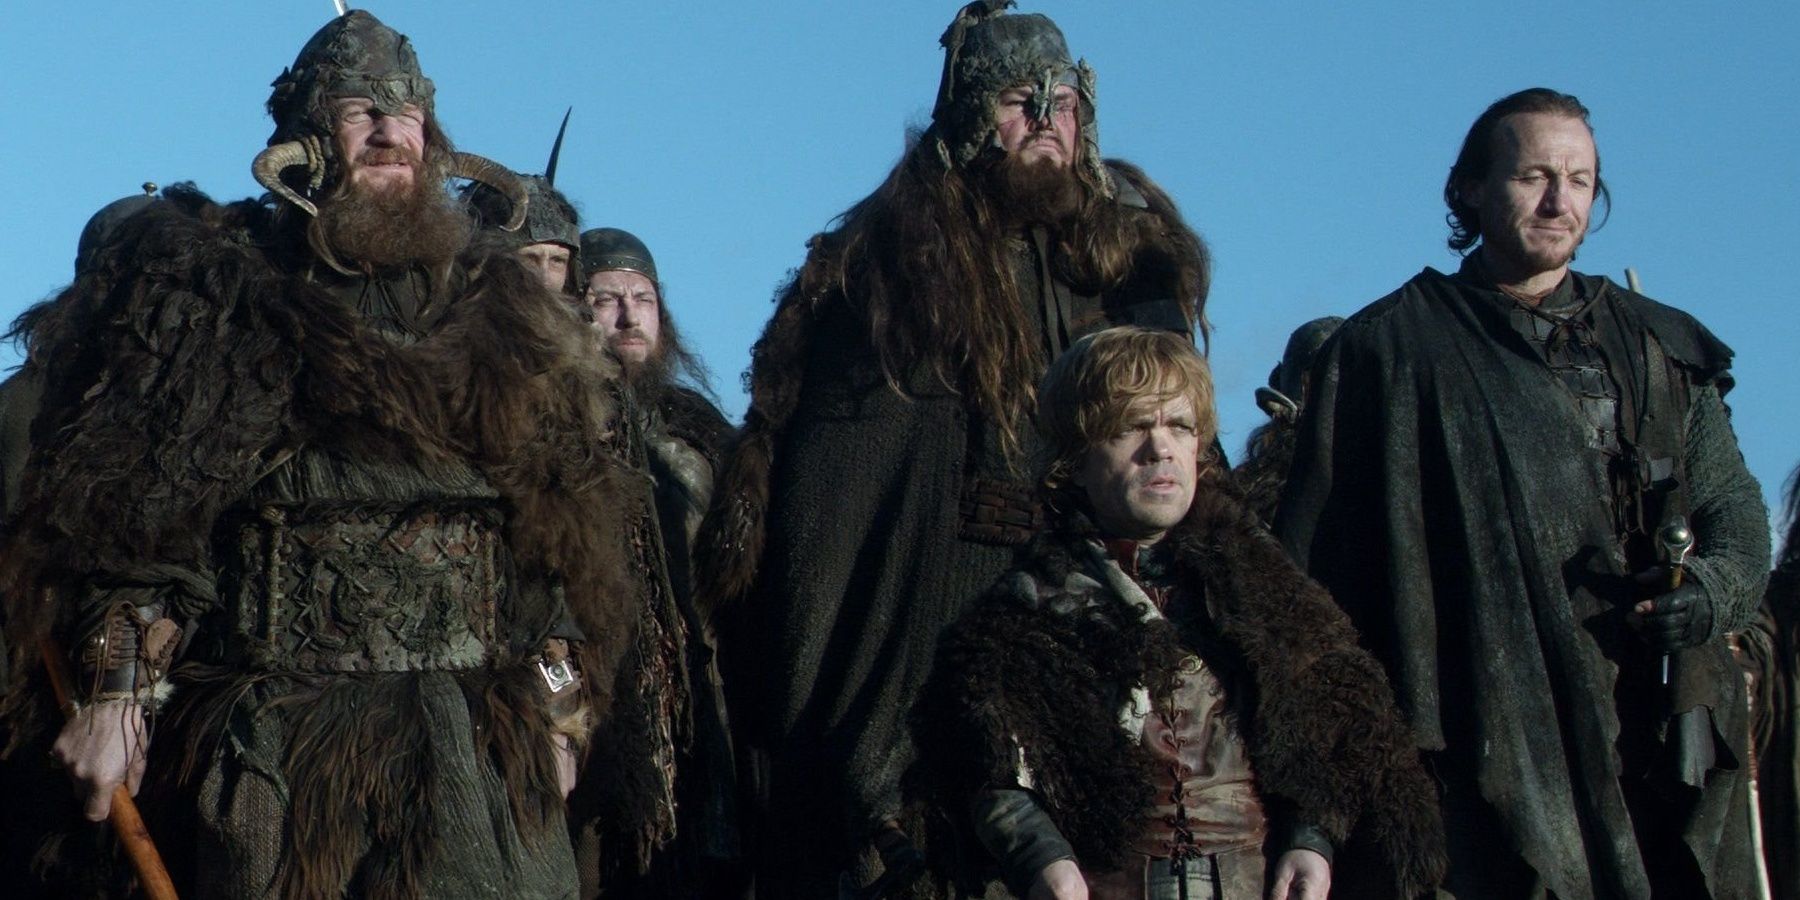 Tyrion and Bronn lead the hill tribes in Game of Thrones